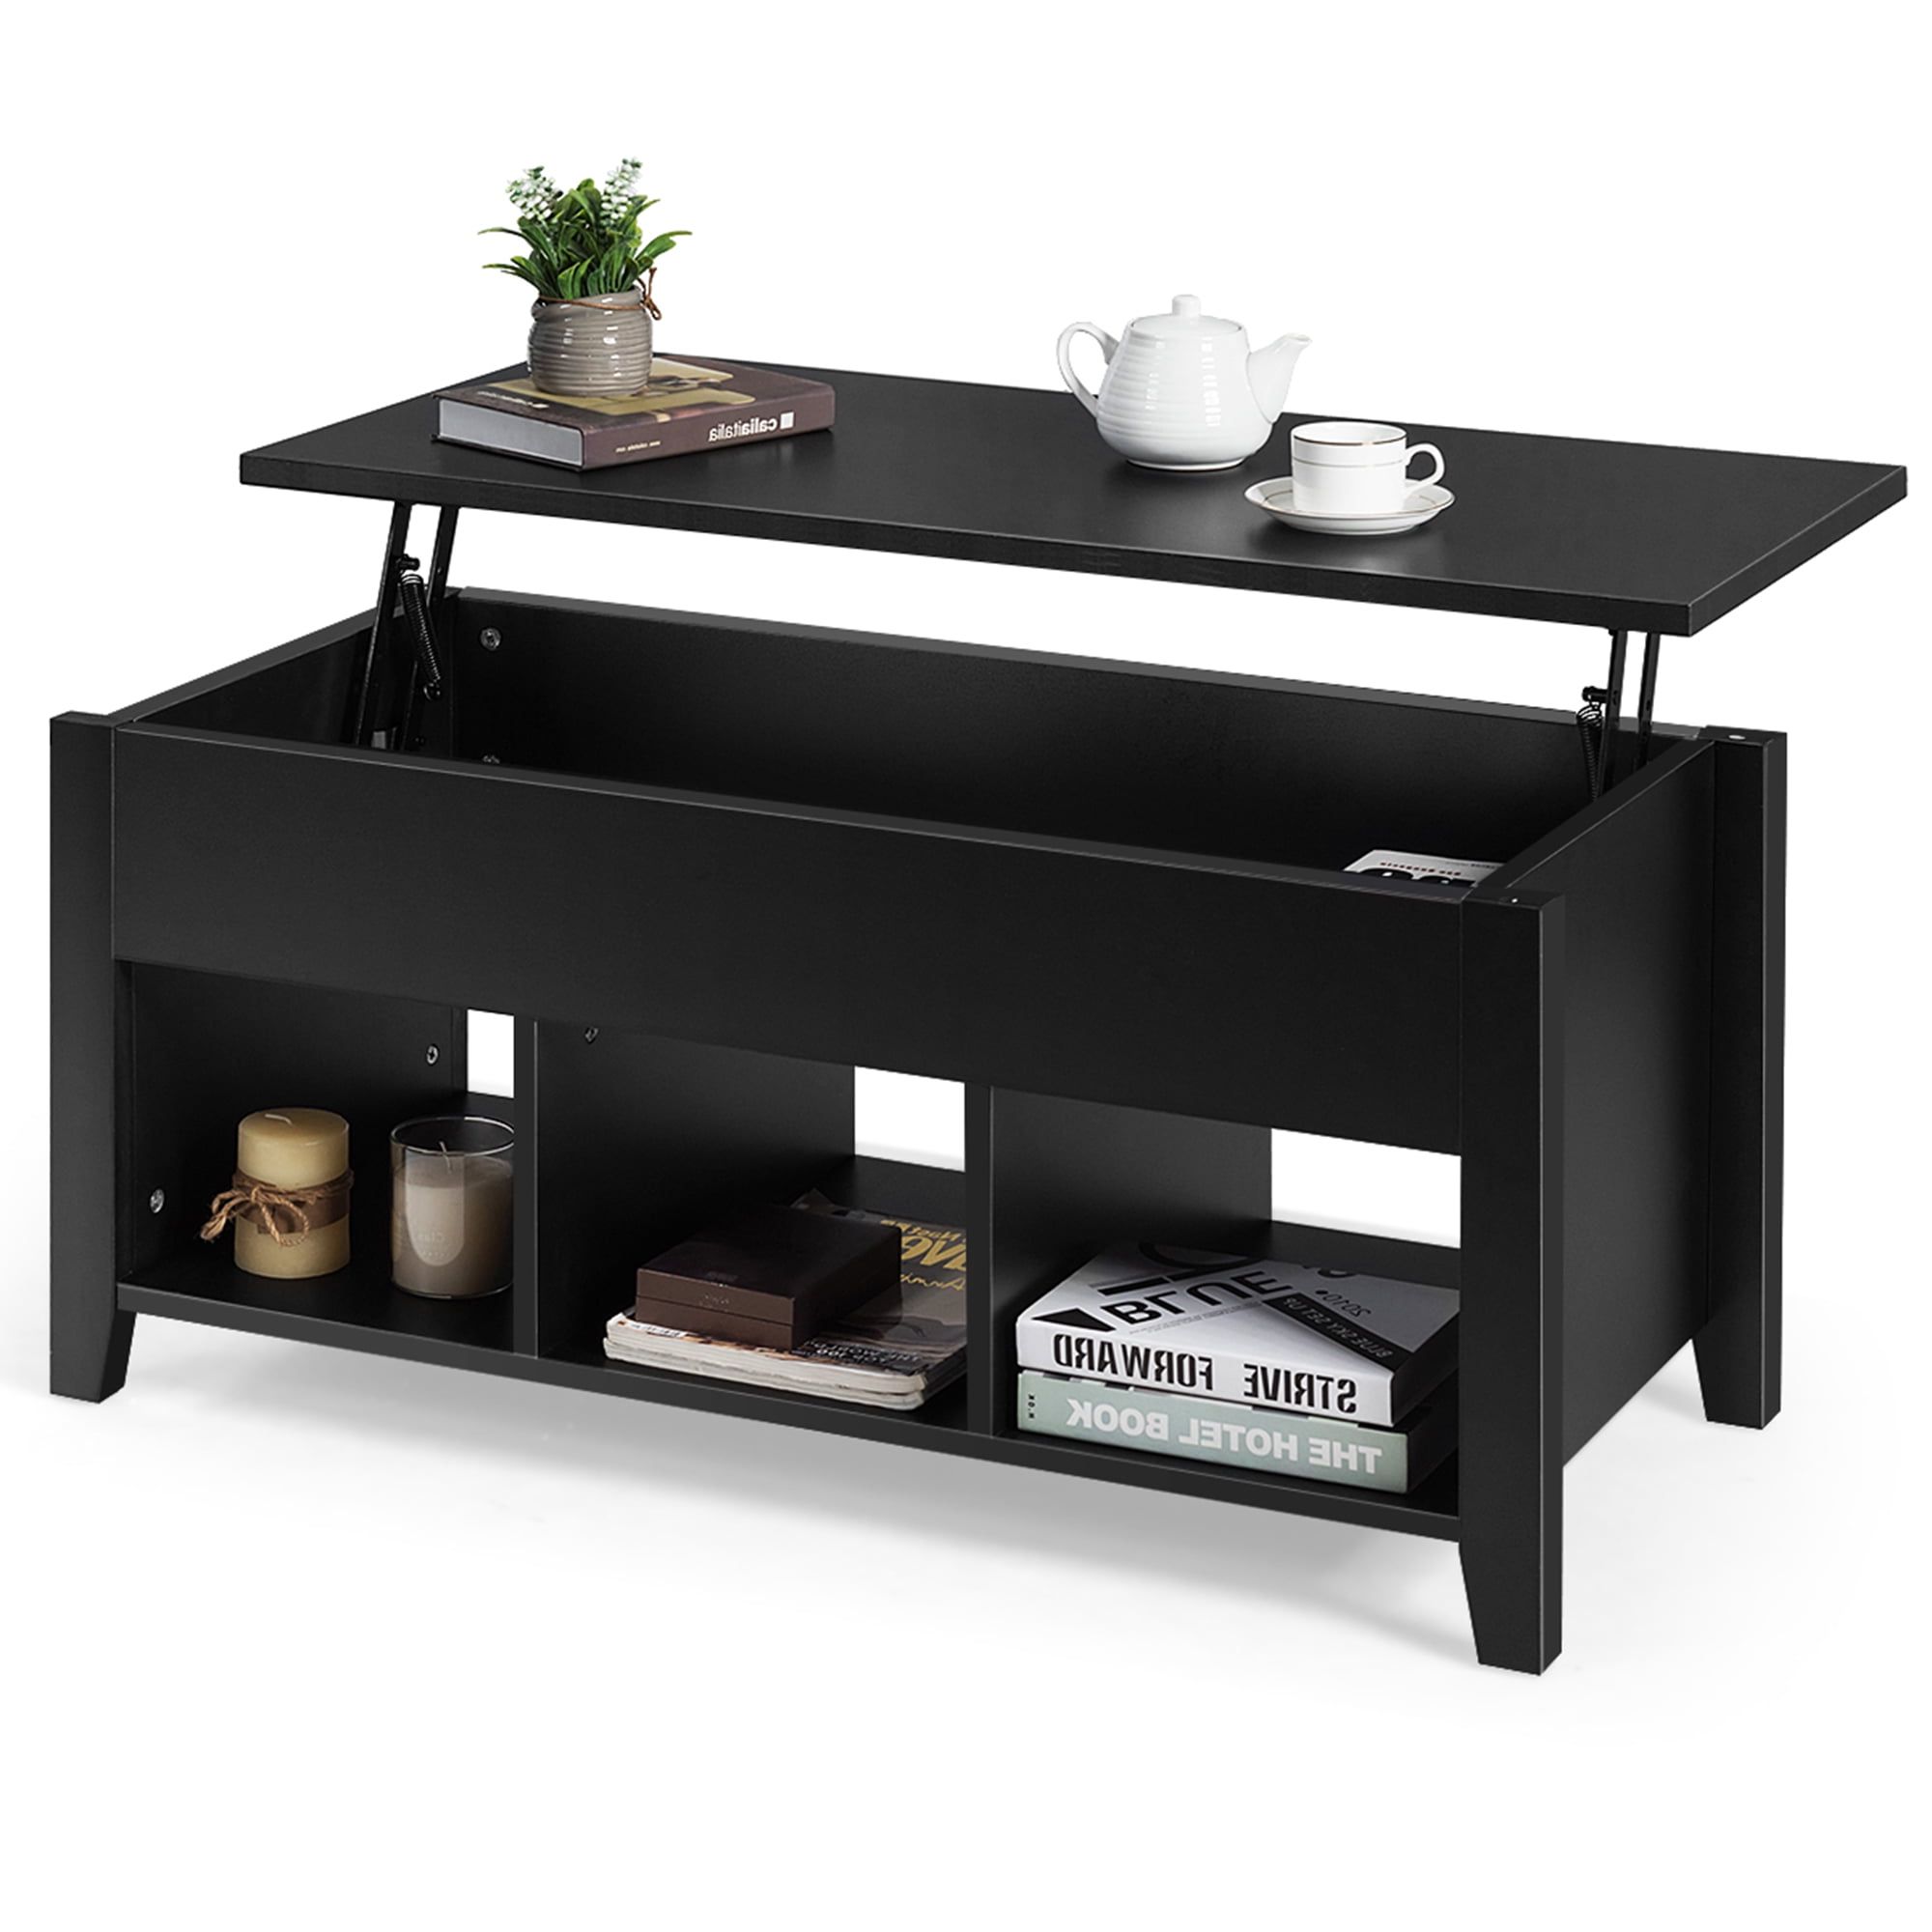 Lift Top Coffee Tables With Shelves Inside Trendy Gymax Lift Top Coffee Table W/ Storage Compartment Shelf Living Room (View 2 of 15)